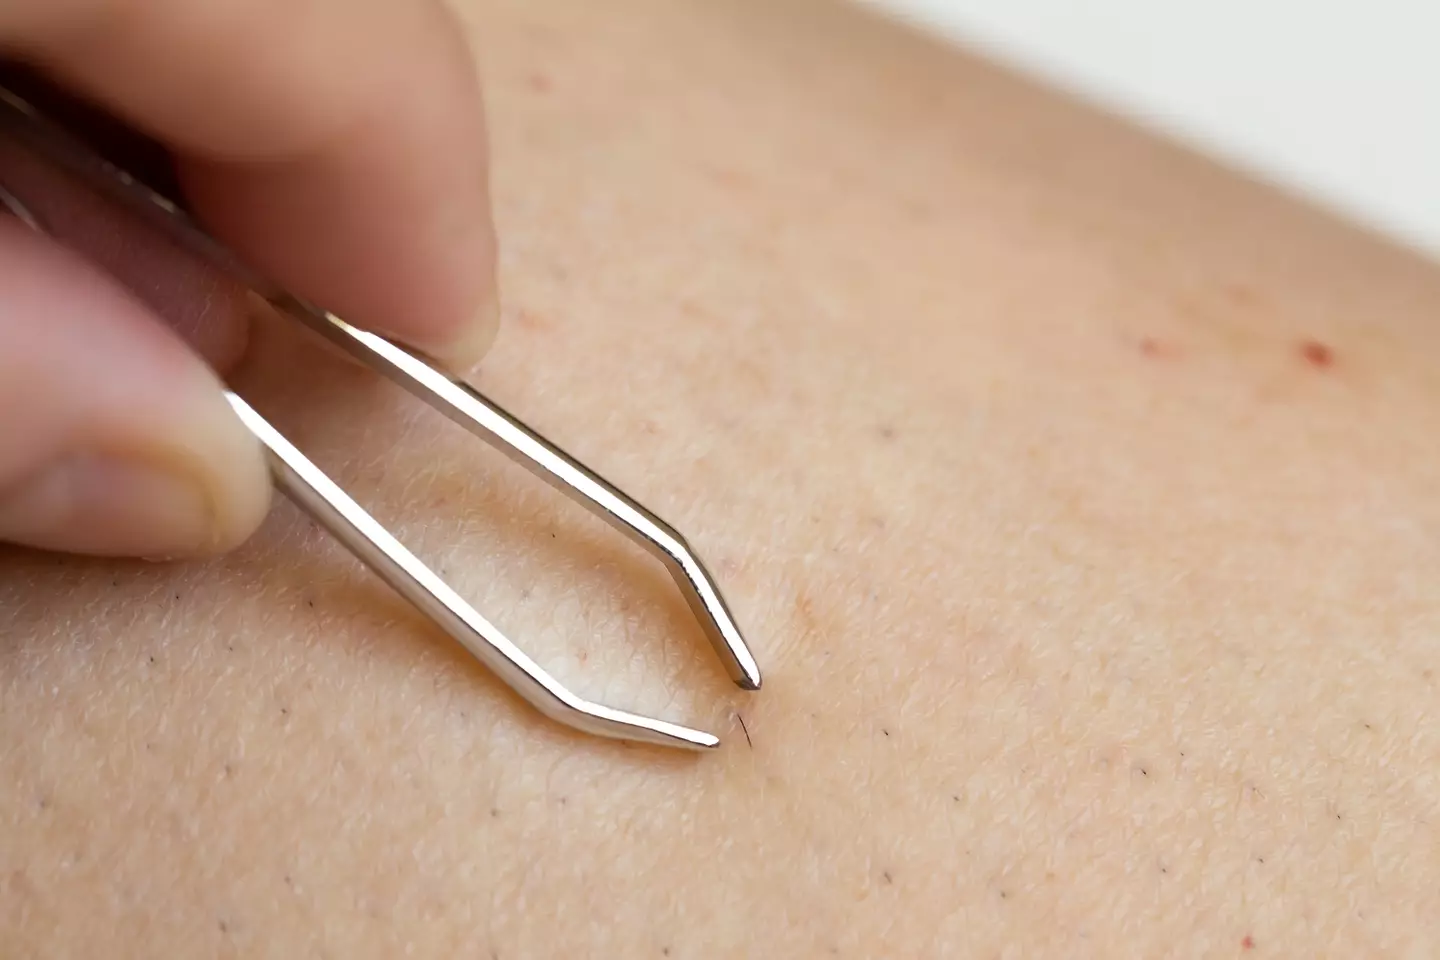 NHS are warning people how best to prevent an ingrown hair.